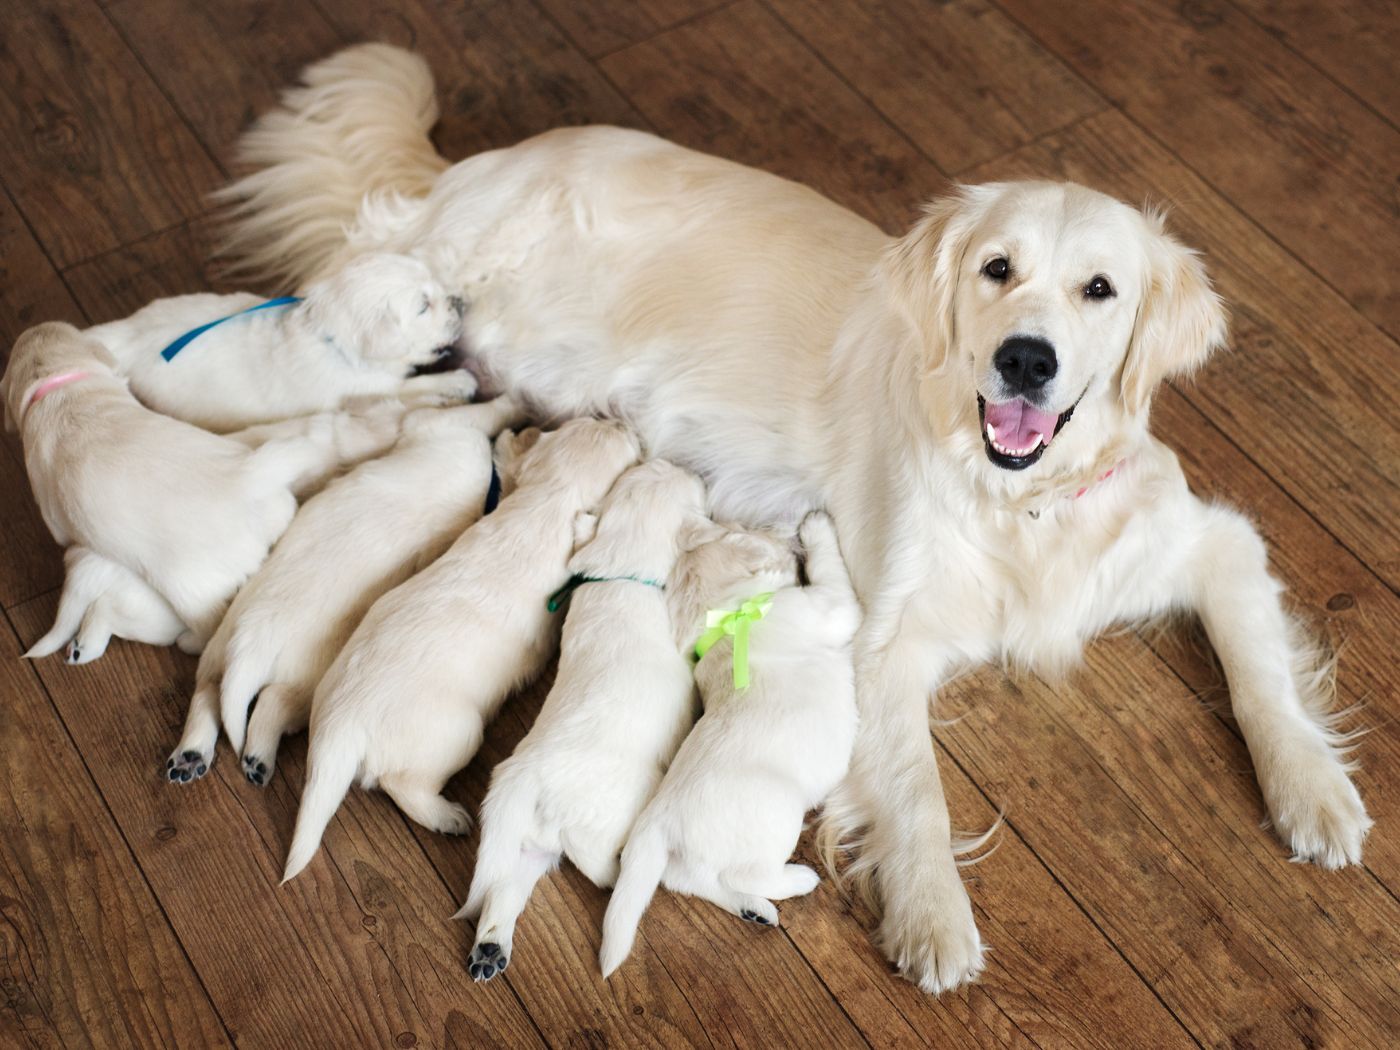 what should i feed my dog after she gives birth